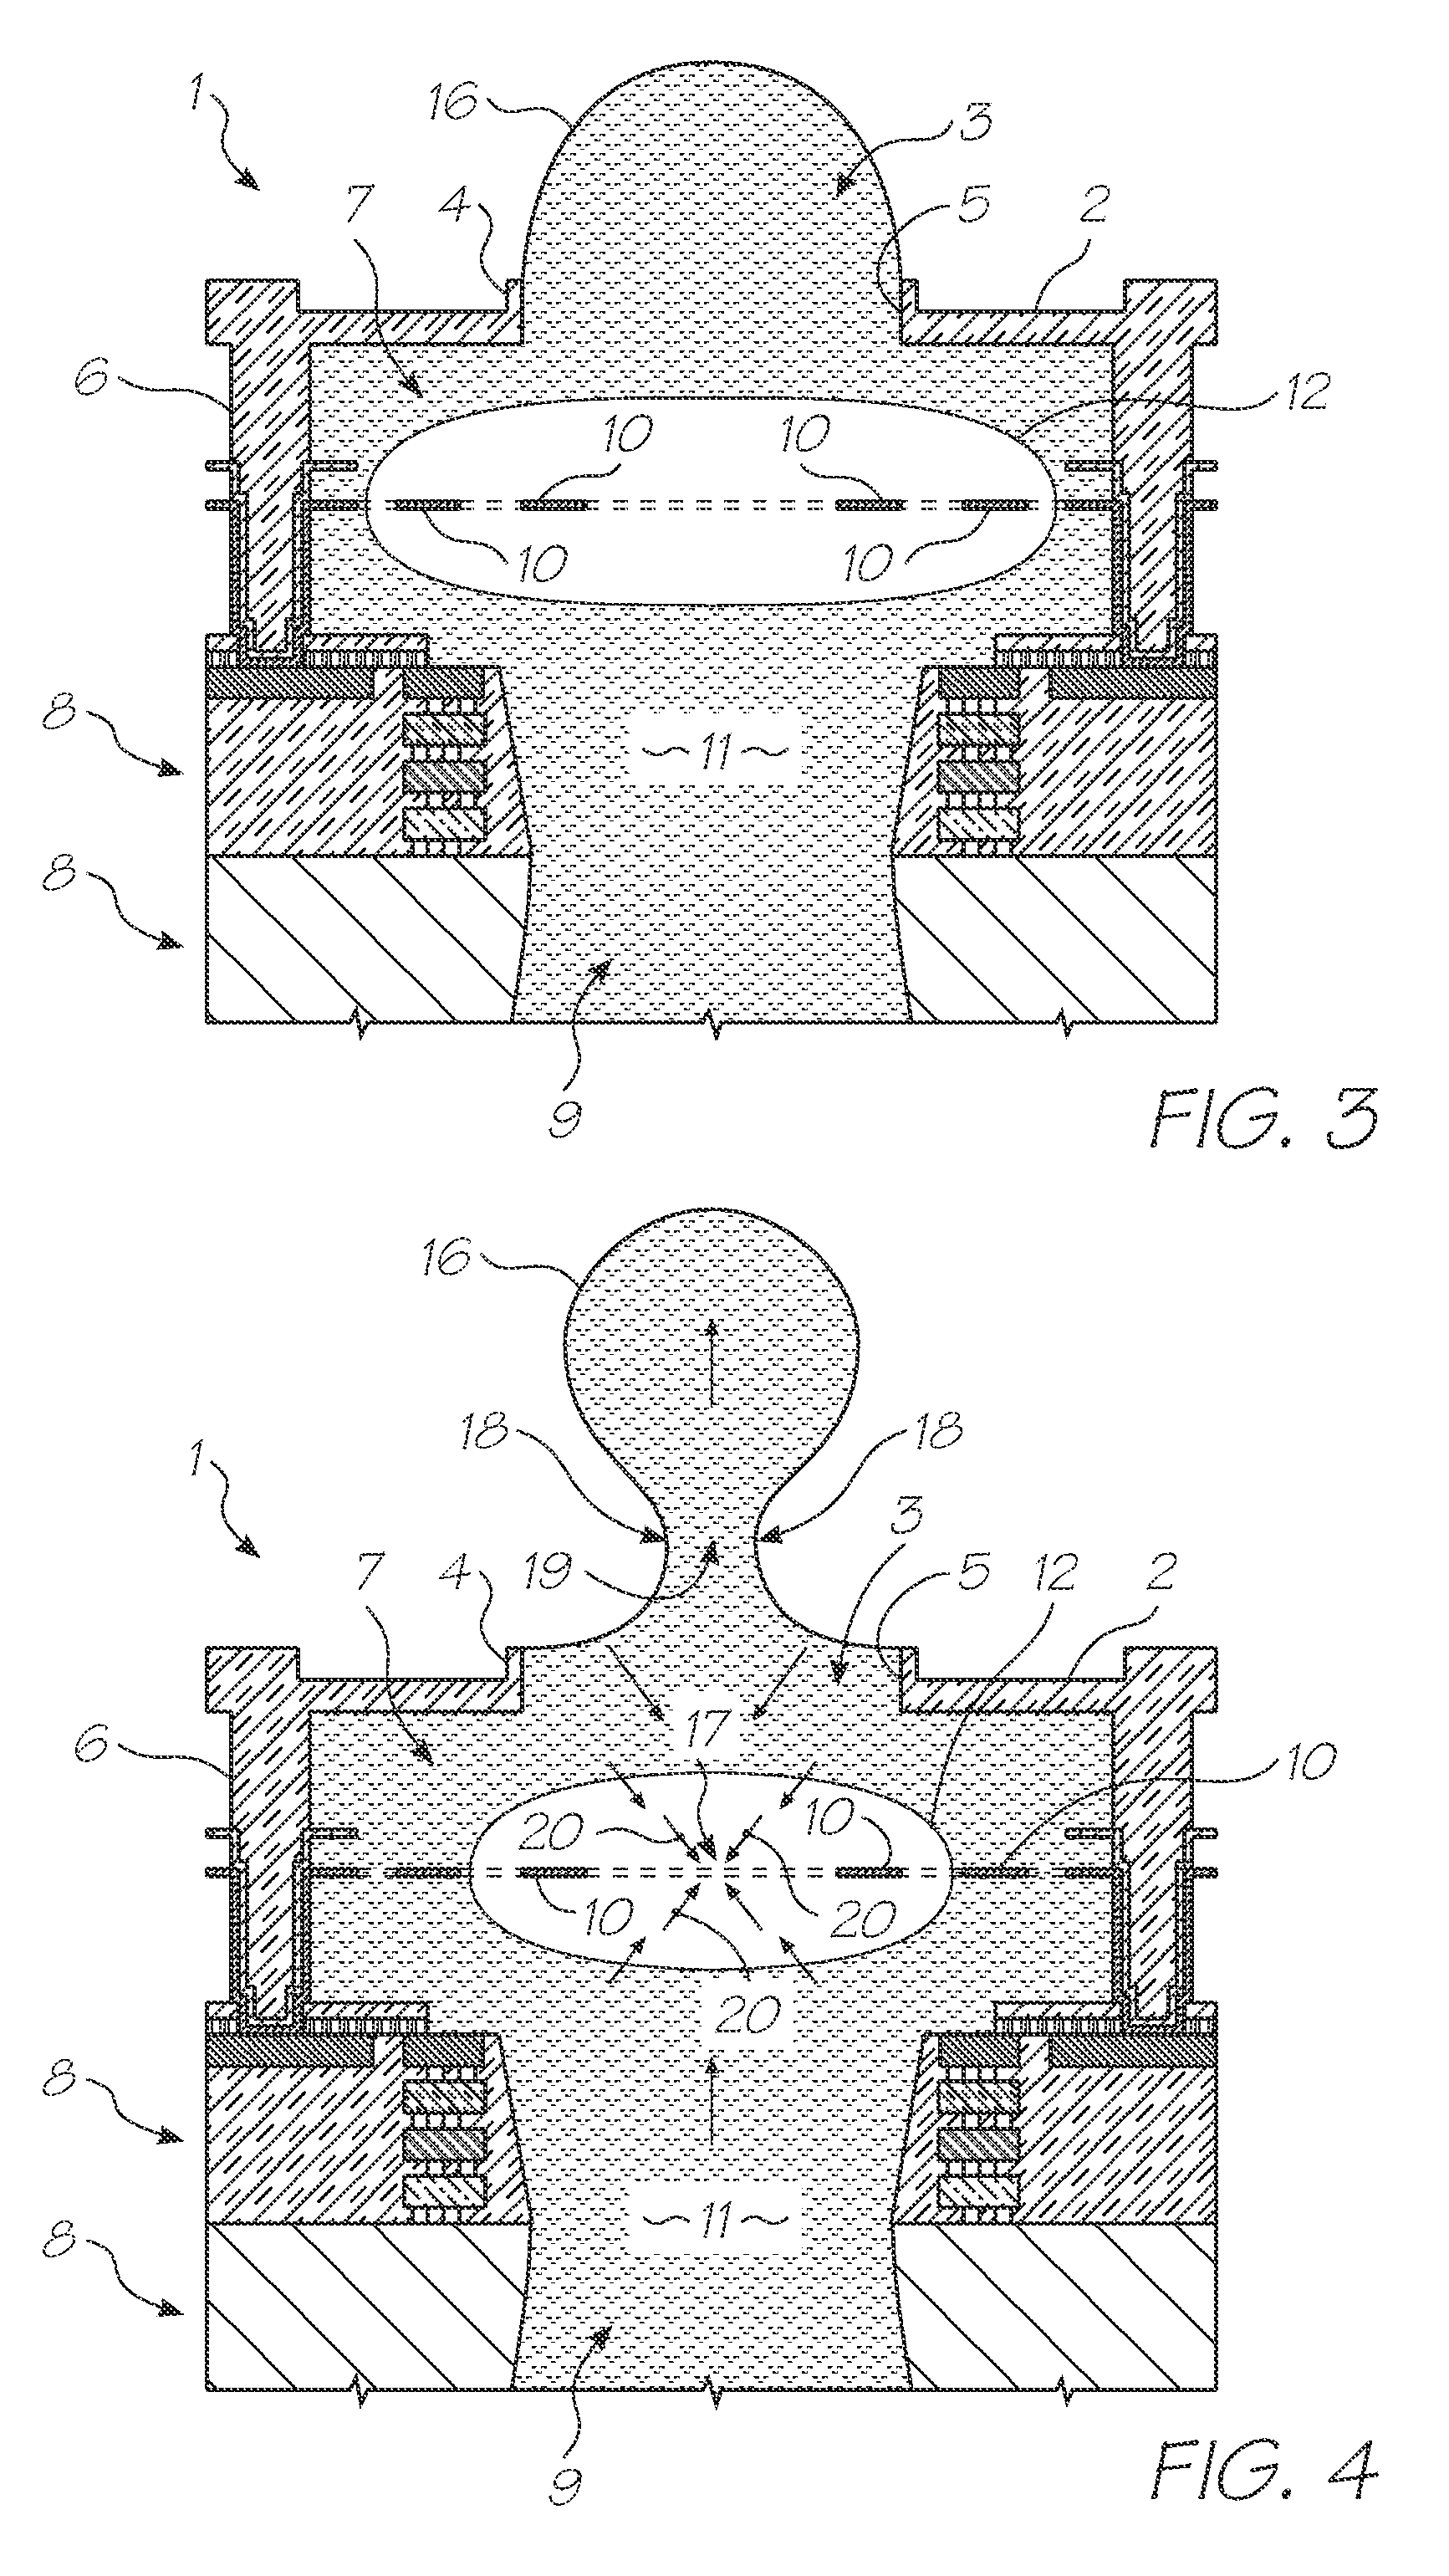 Printhead with increasing drive pulse to counter heater oxide growth